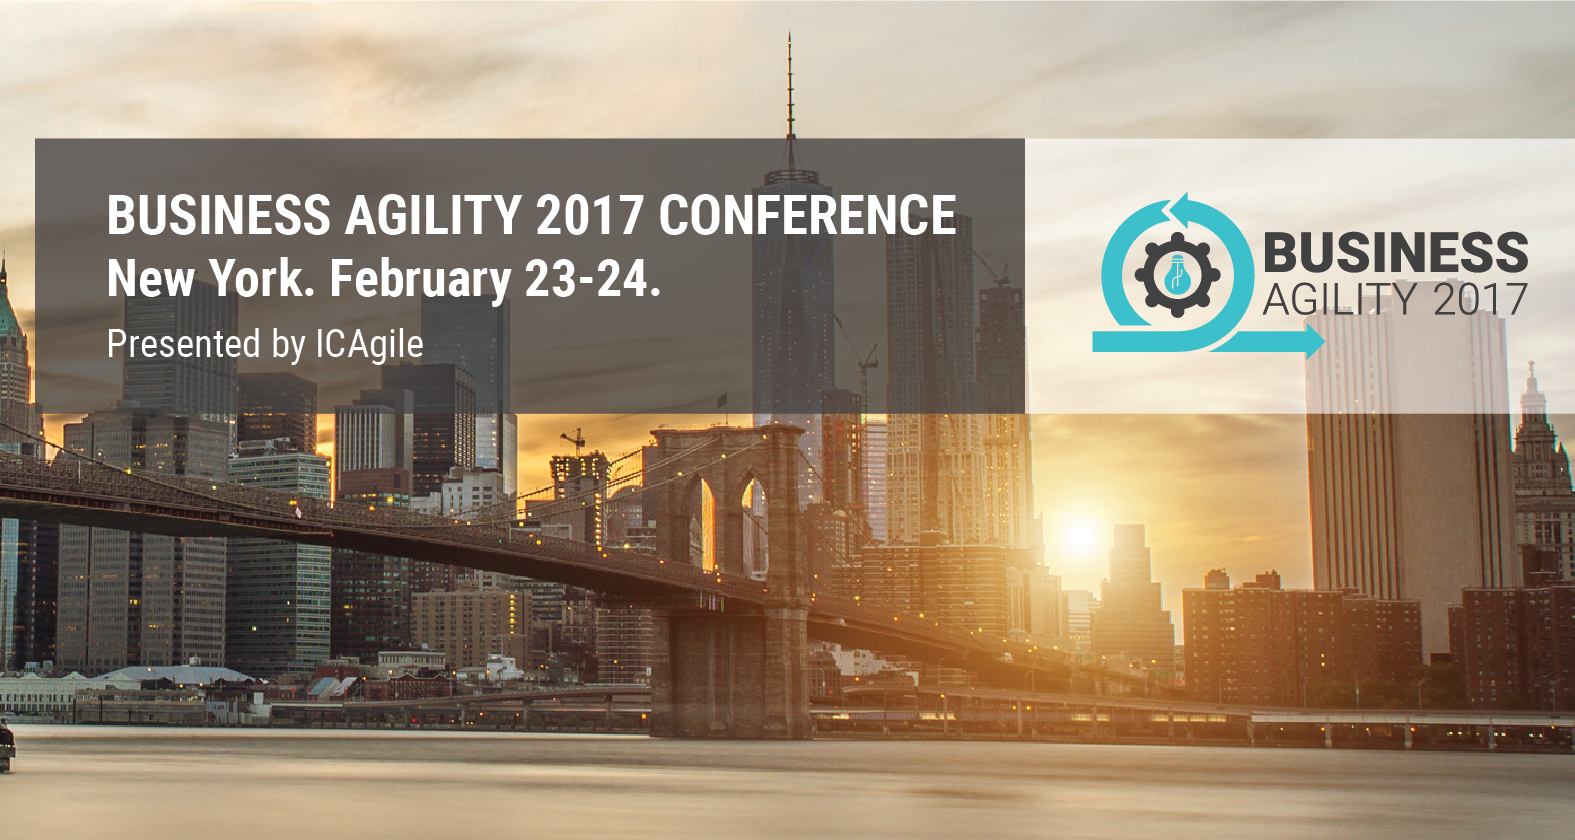 Press Release - Business Agility 2017 ends on a high note